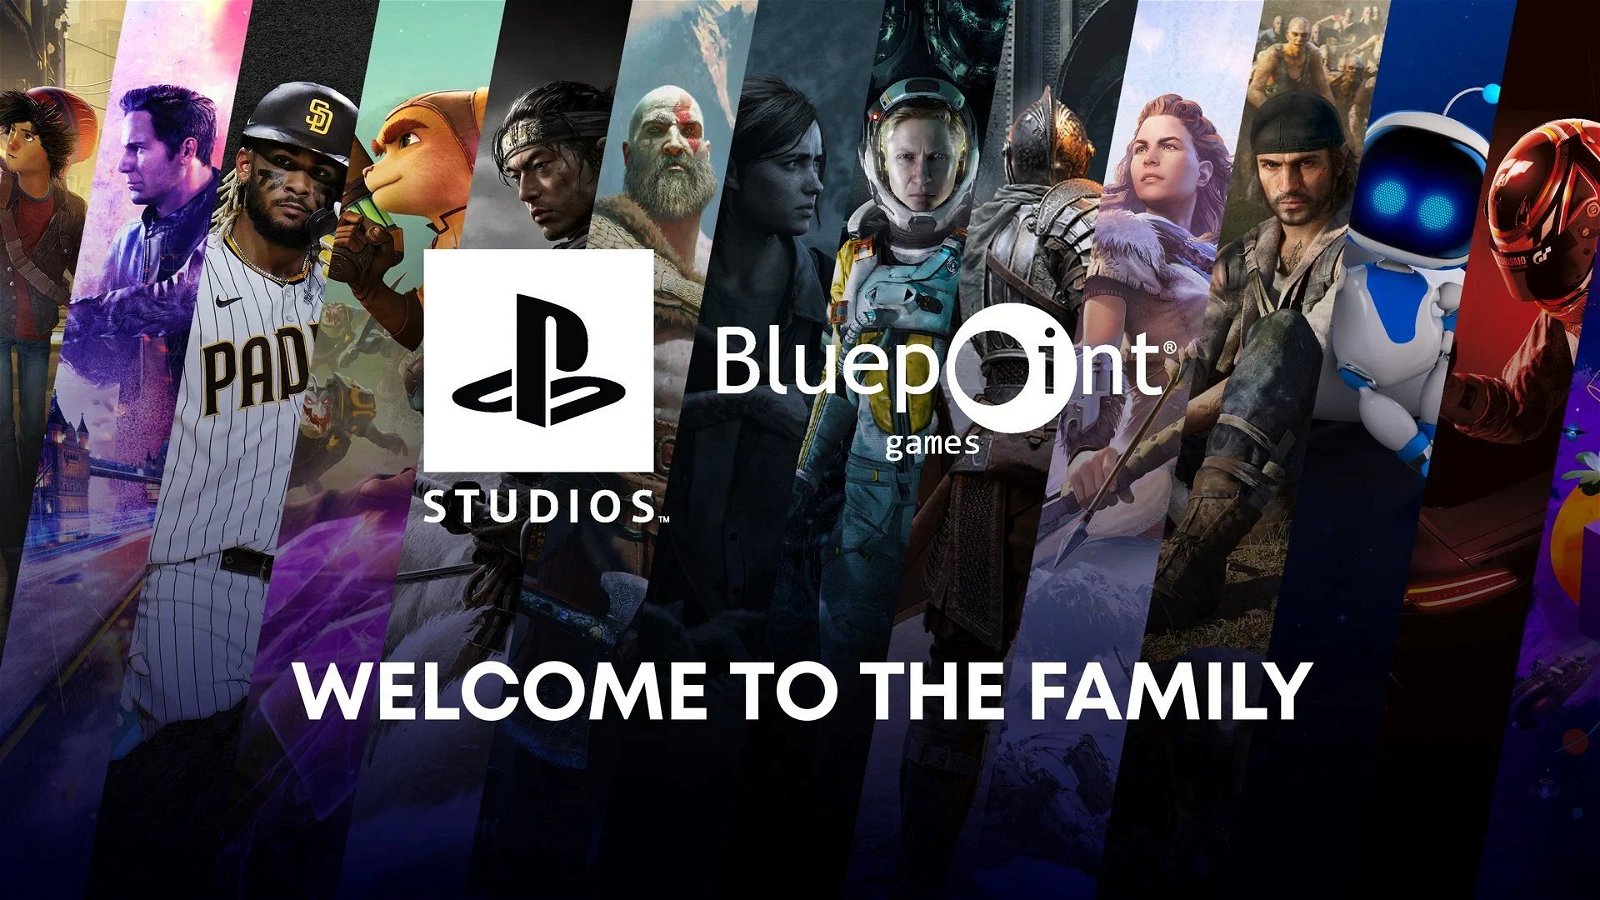 Sony acquires Bluepoint Games